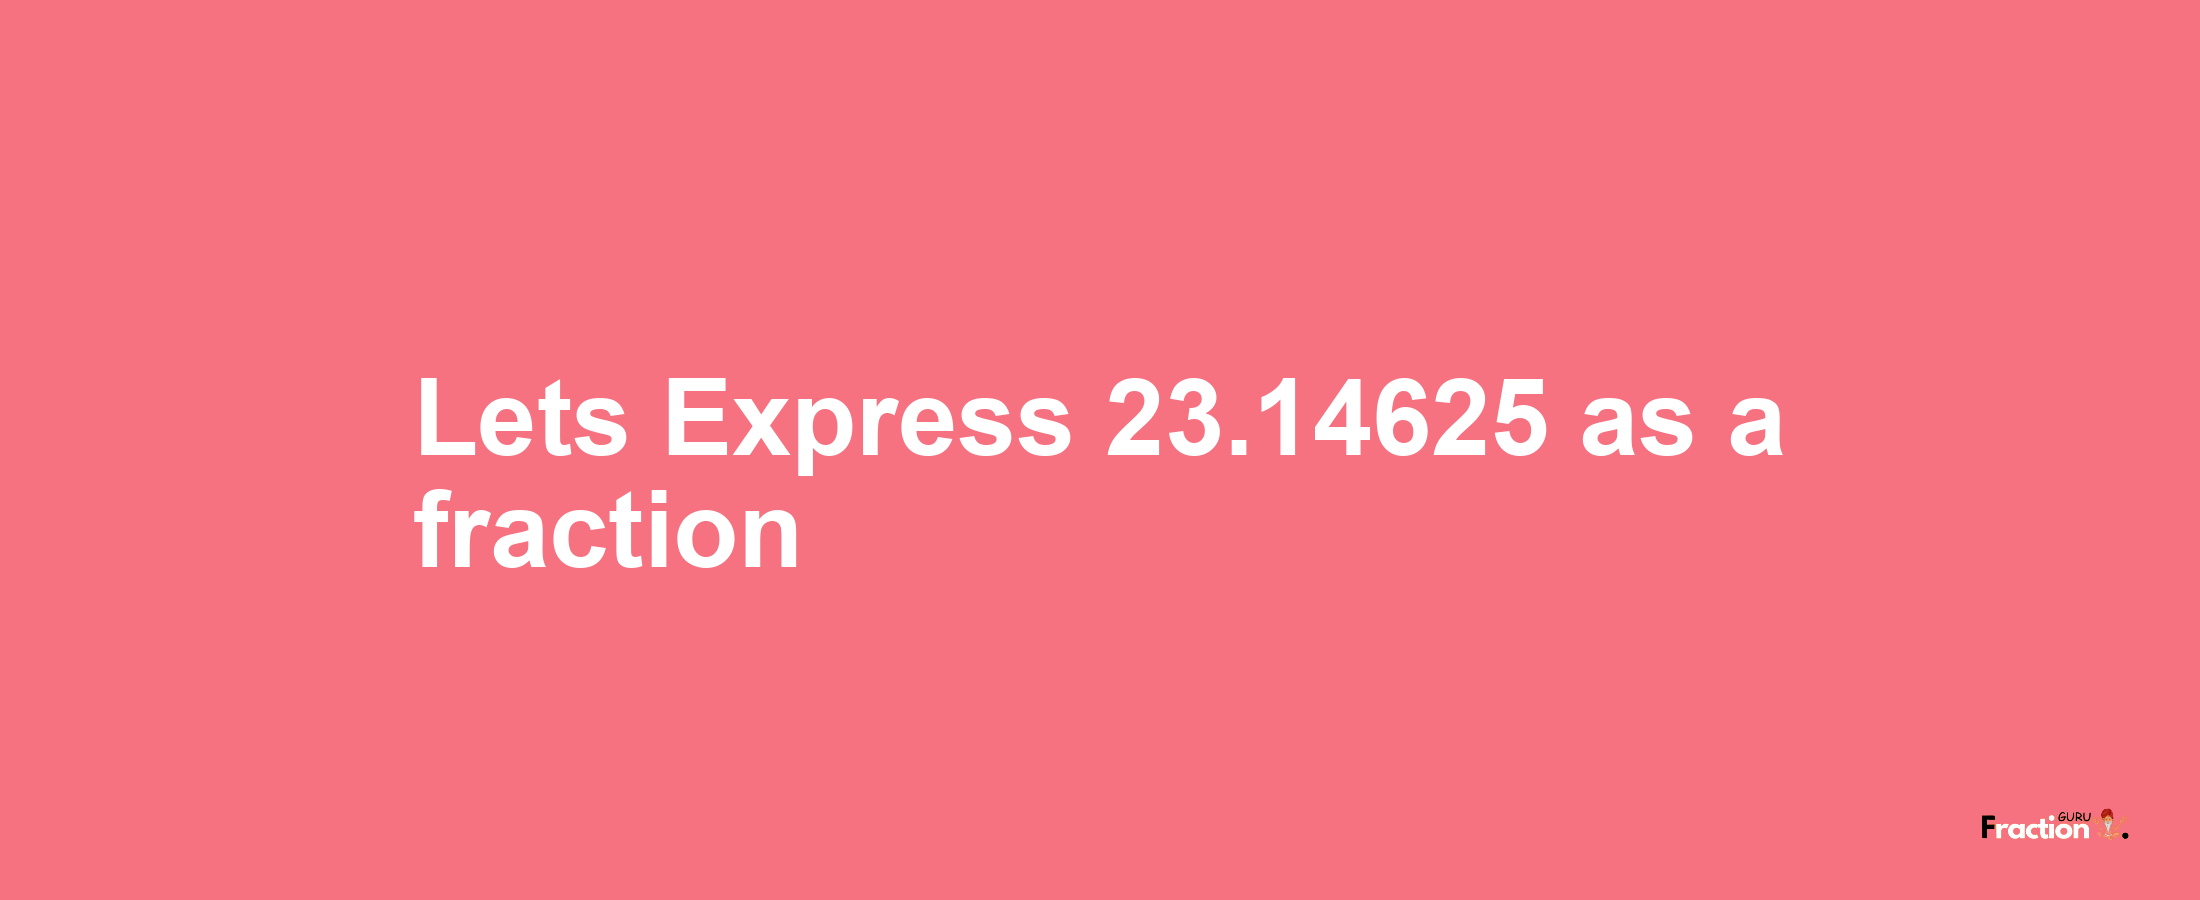 Lets Express 23.14625 as afraction